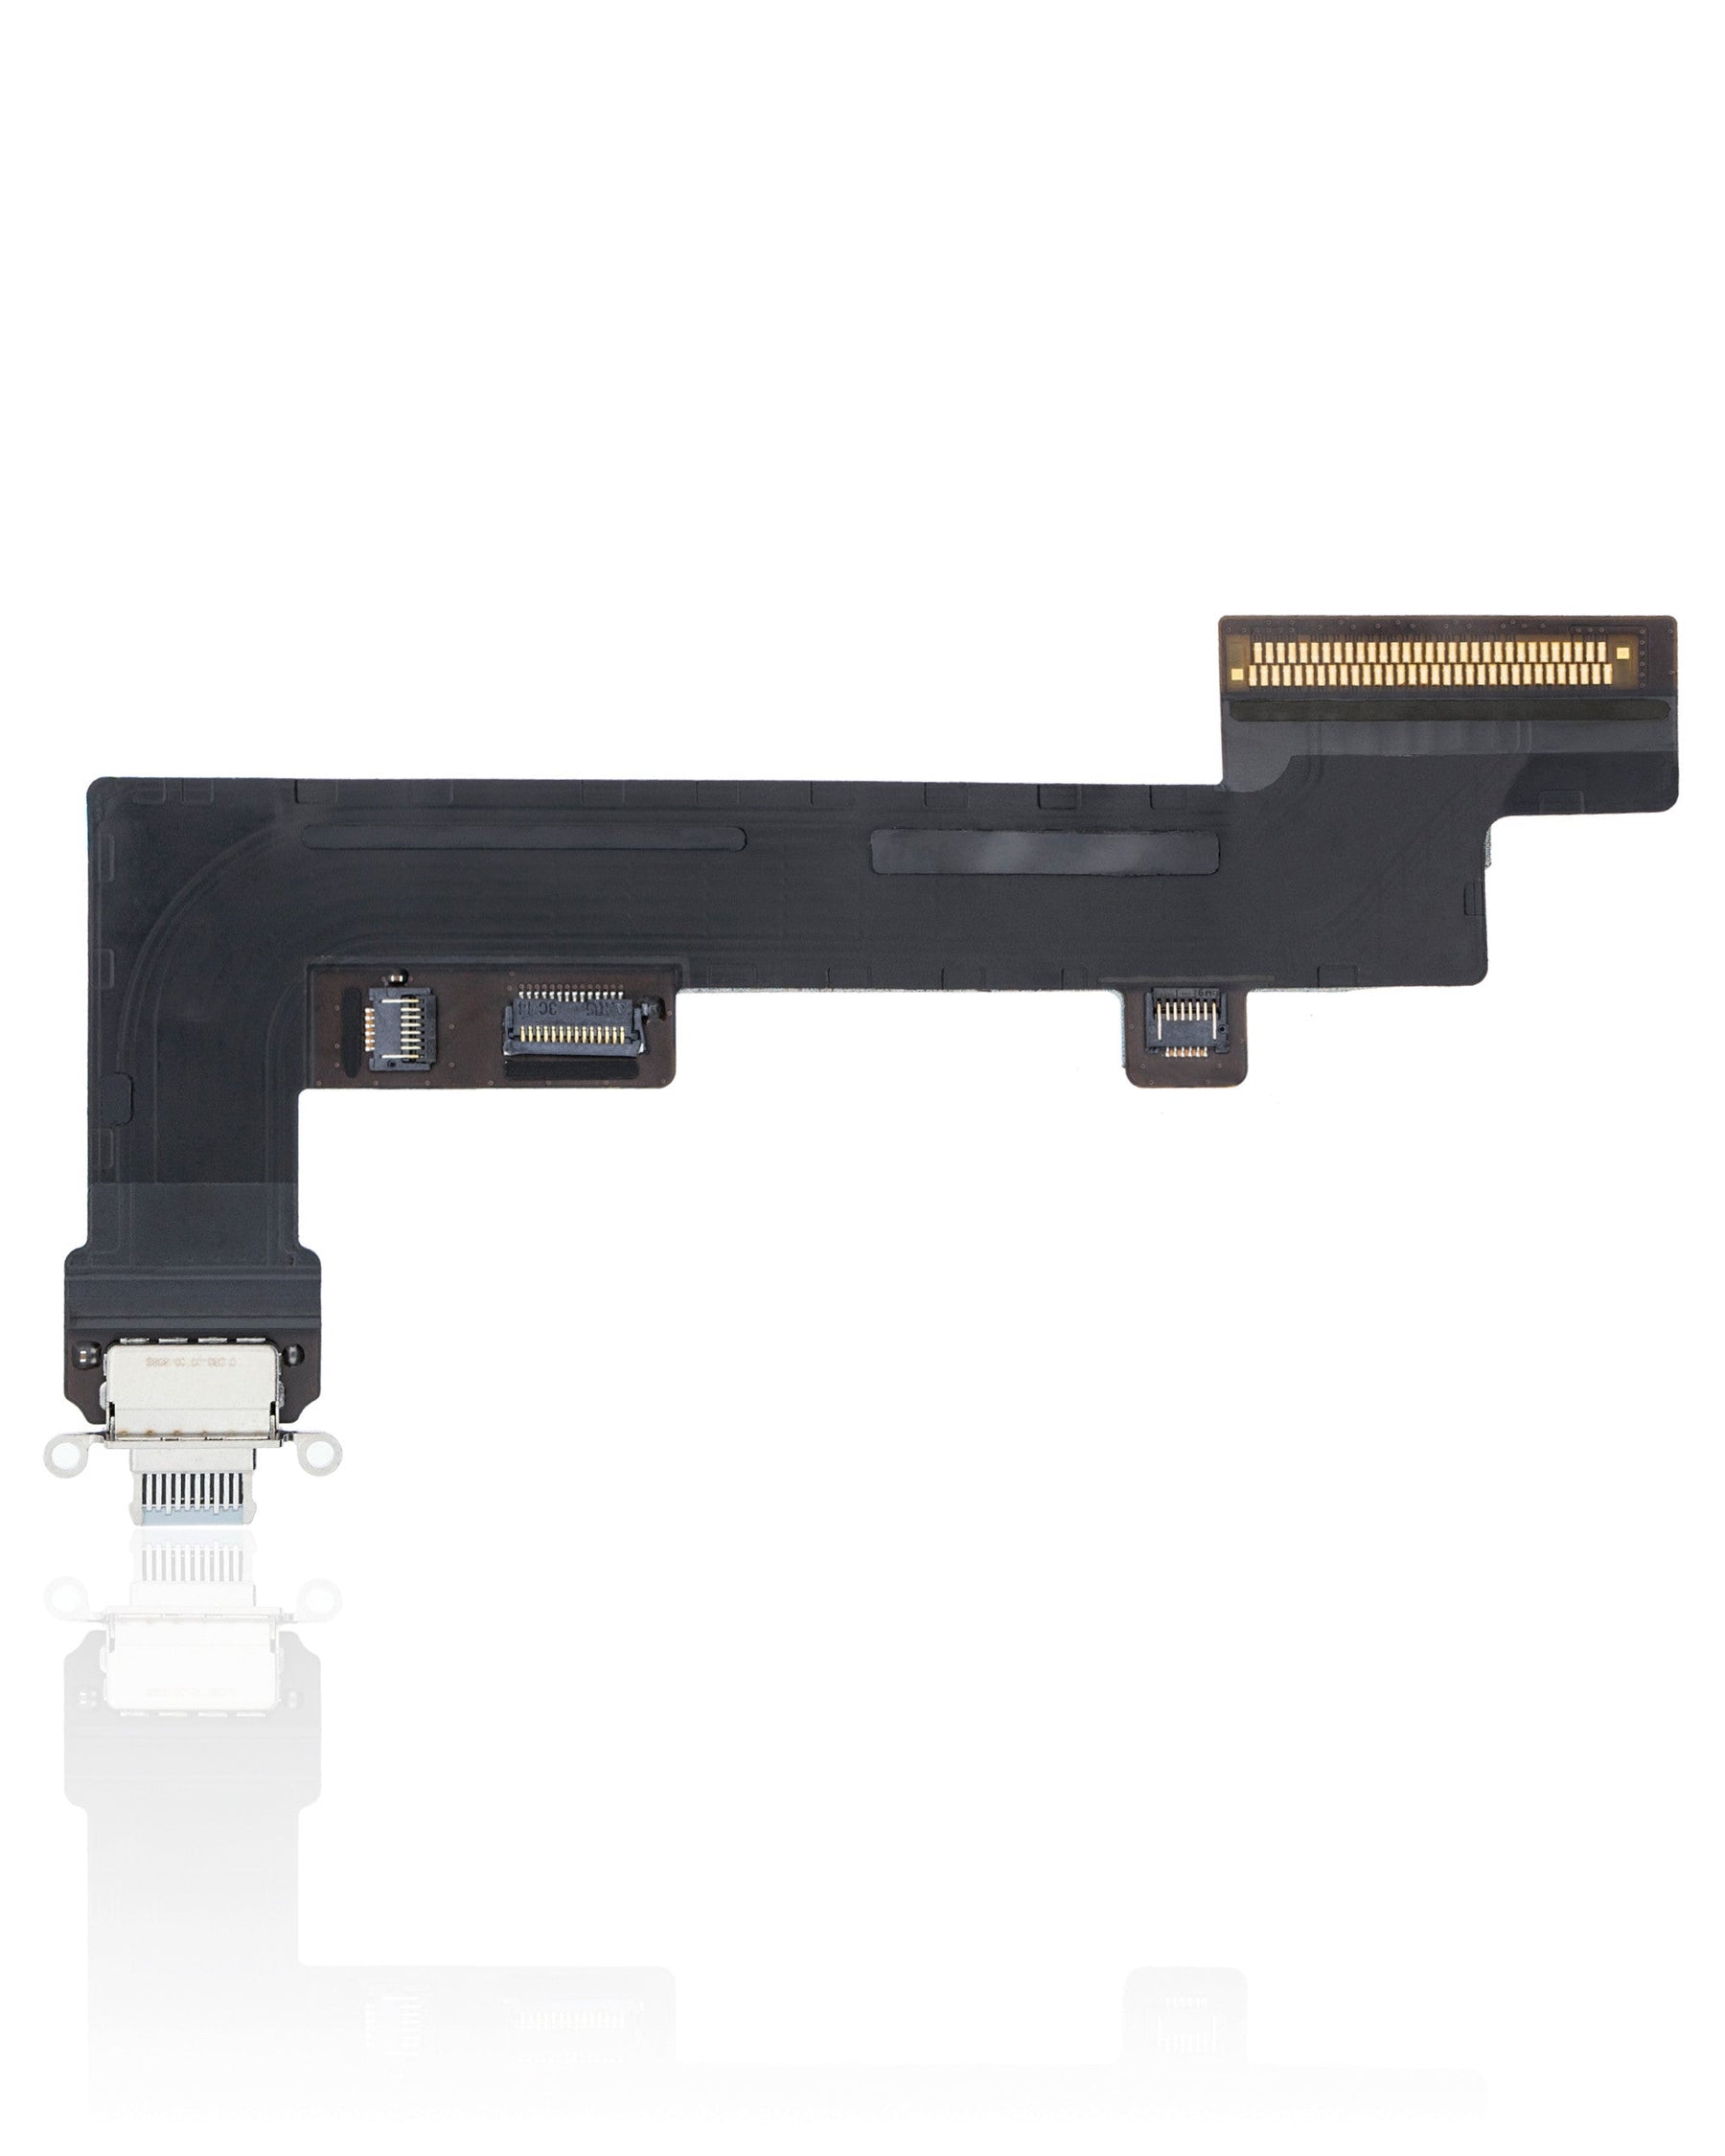 CHARGING PORT FLEX CABLE (4G VERSION) COMPATIBLE FOR IPAD AIR 4 - SKY BLUE